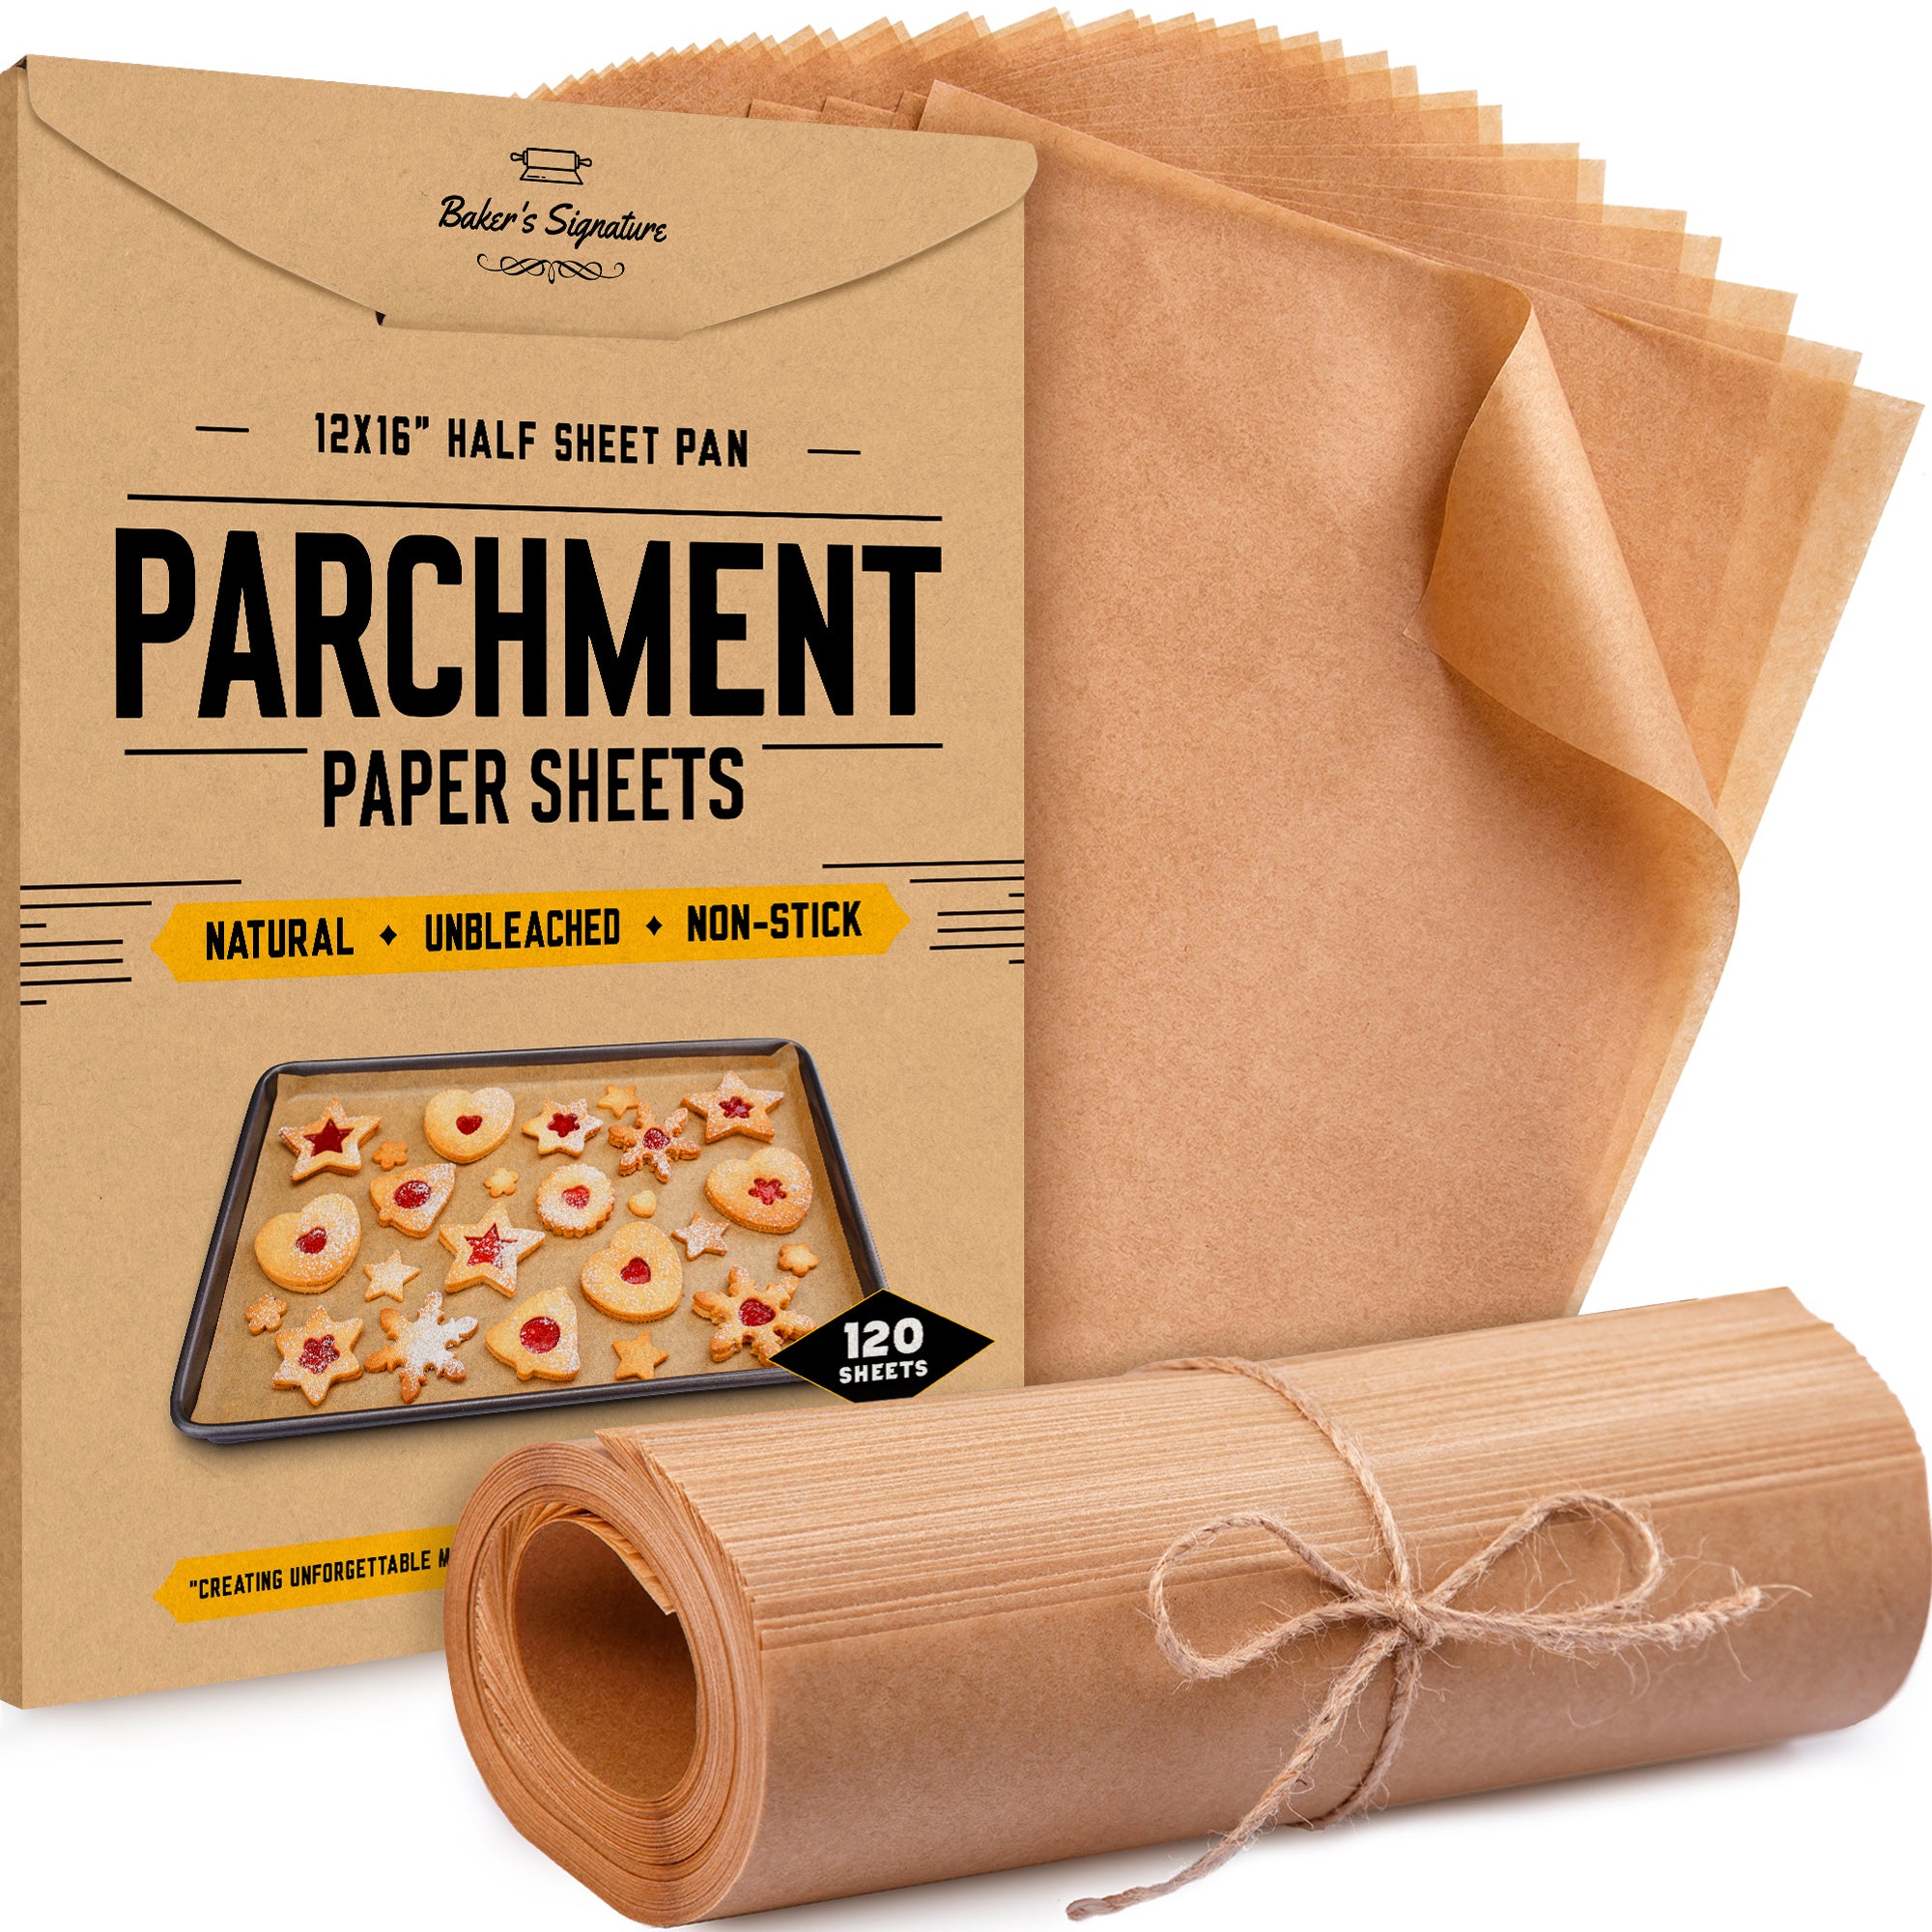 SMARTAKE 200 Pcs Parchment Paper Baking Sheets, 12x16 Inches Non-Stick  Precut Baking Parchment, Perfect for Baking Grilling Air Fryer Steaming  Bread